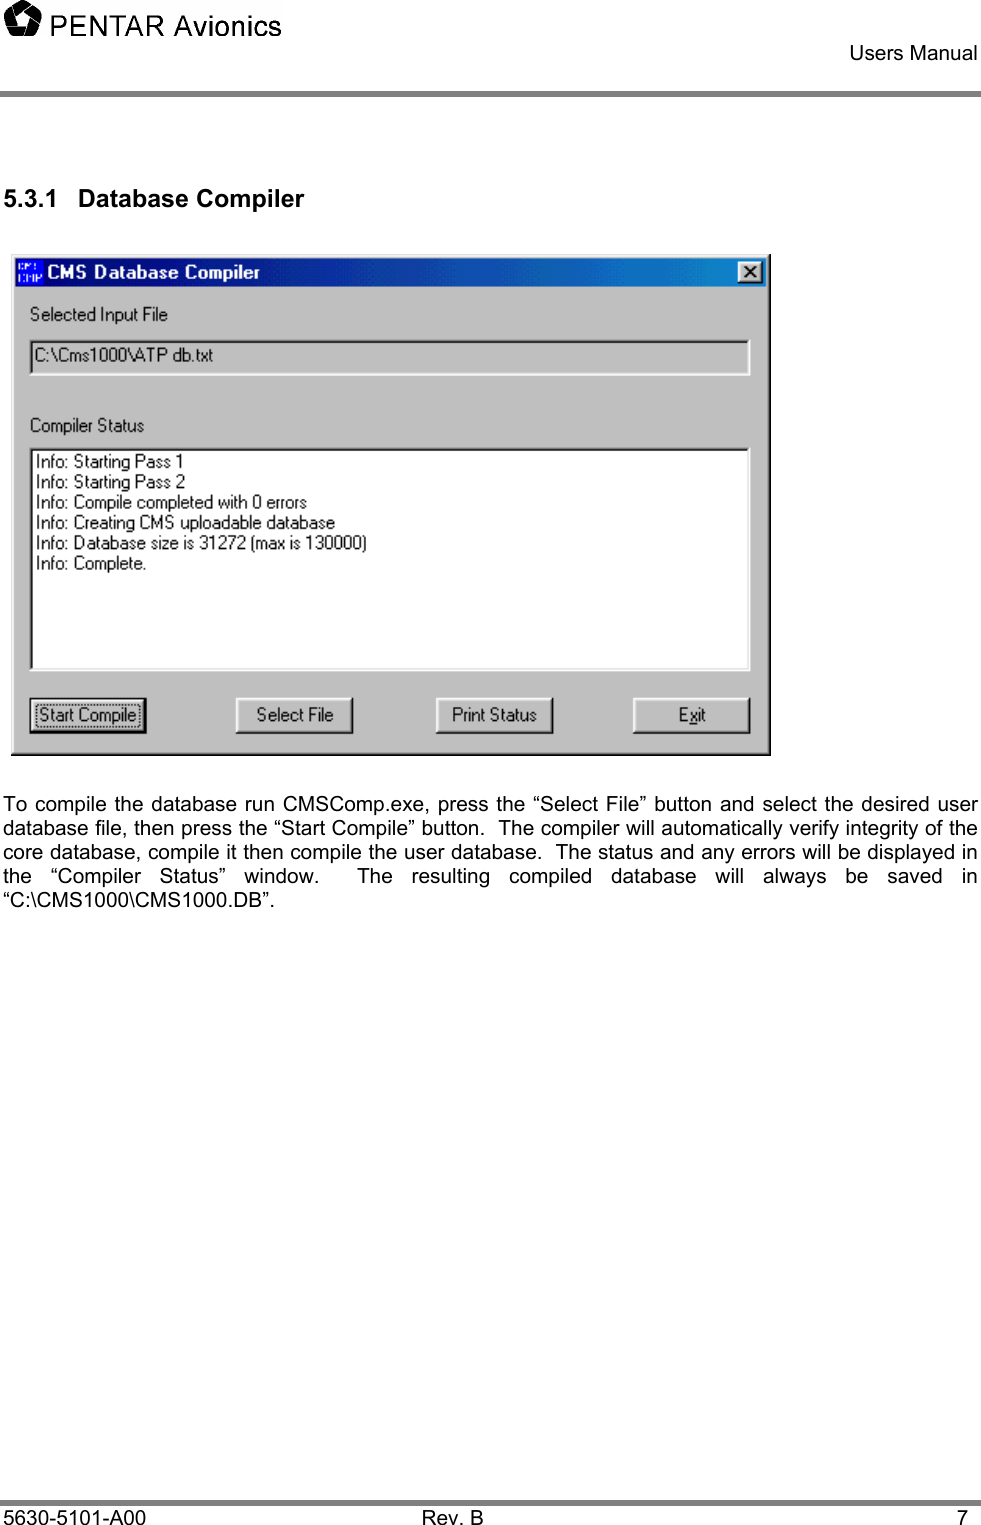    Users Manual    5630-5101-A00 Rev. B  7 5.3.1 Database Compiler  To compile the database run CMSComp.exe, press the “Select File” button and select the desired user database file, then press the “Start Compile” button.  The compiler will automatically verify integrity of the core database, compile it then compile the user database.  The status and any errors will be displayed in the “Compiler Status” window.  The resulting compiled database will always be saved in “C:\CMS1000\CMS1000.DB”.  